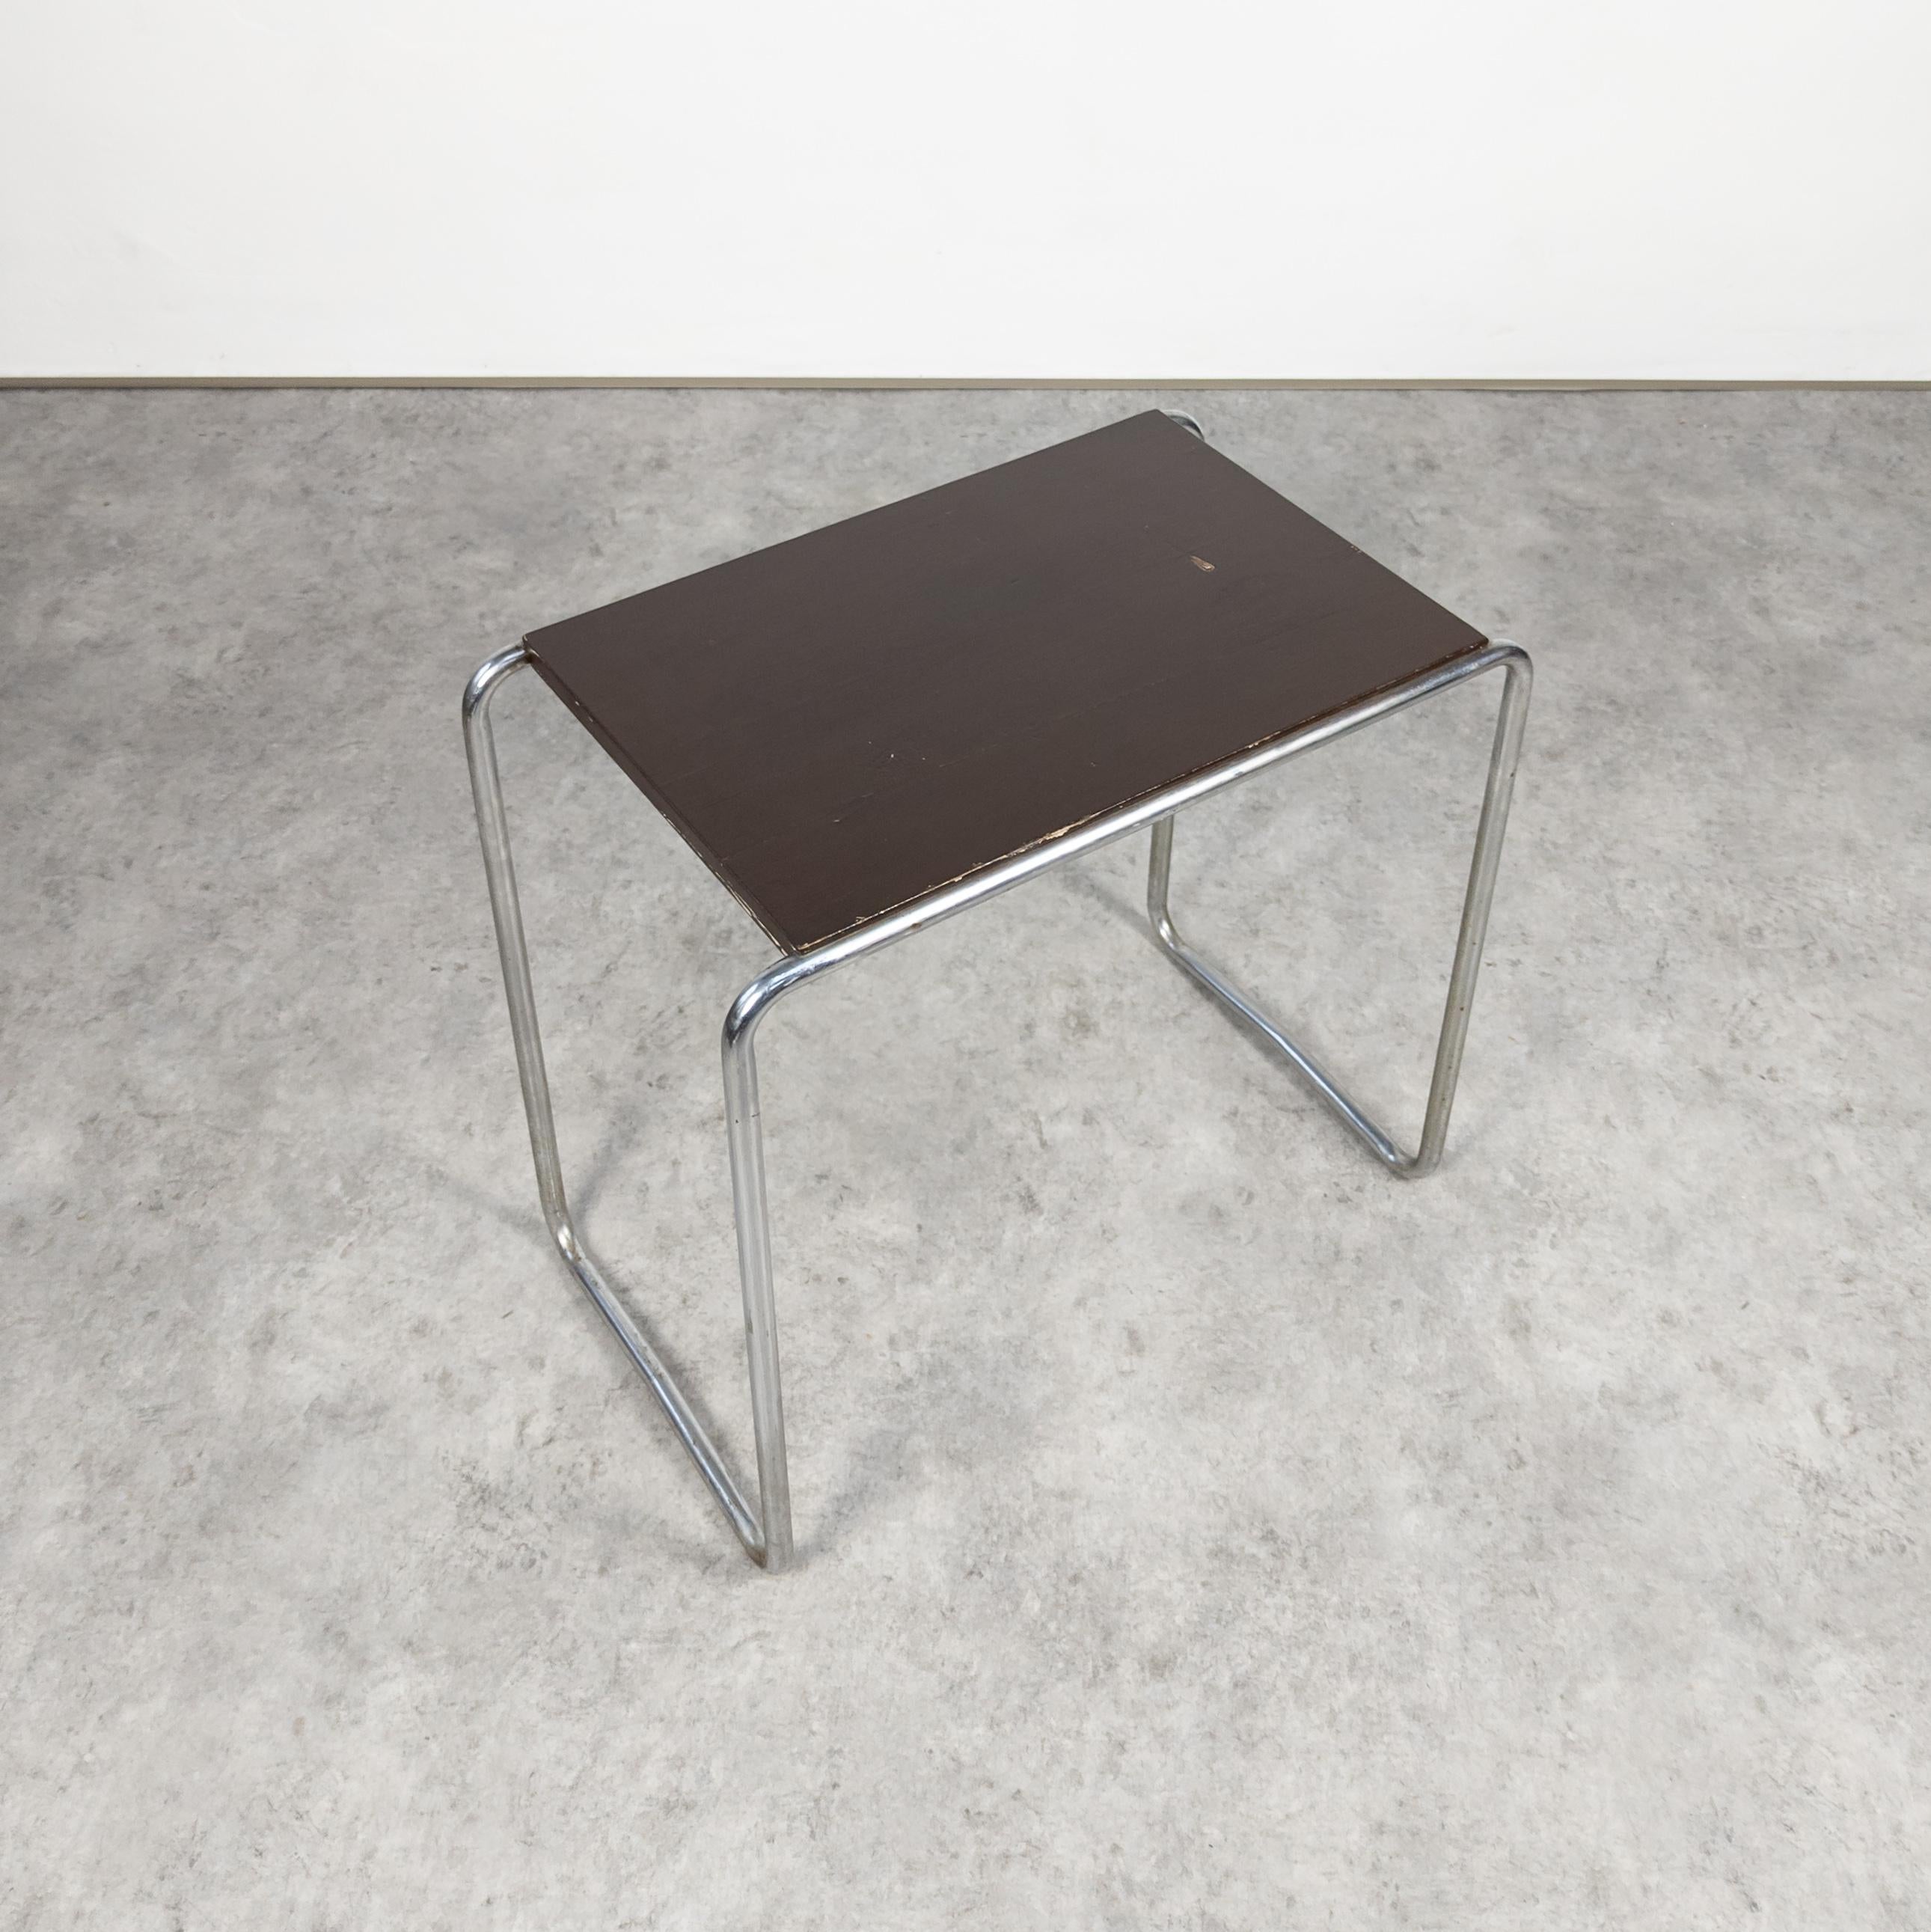 Thonet B 9 Table by Marcel Breuer In Good Condition For Sale In PRAHA 5, CZ